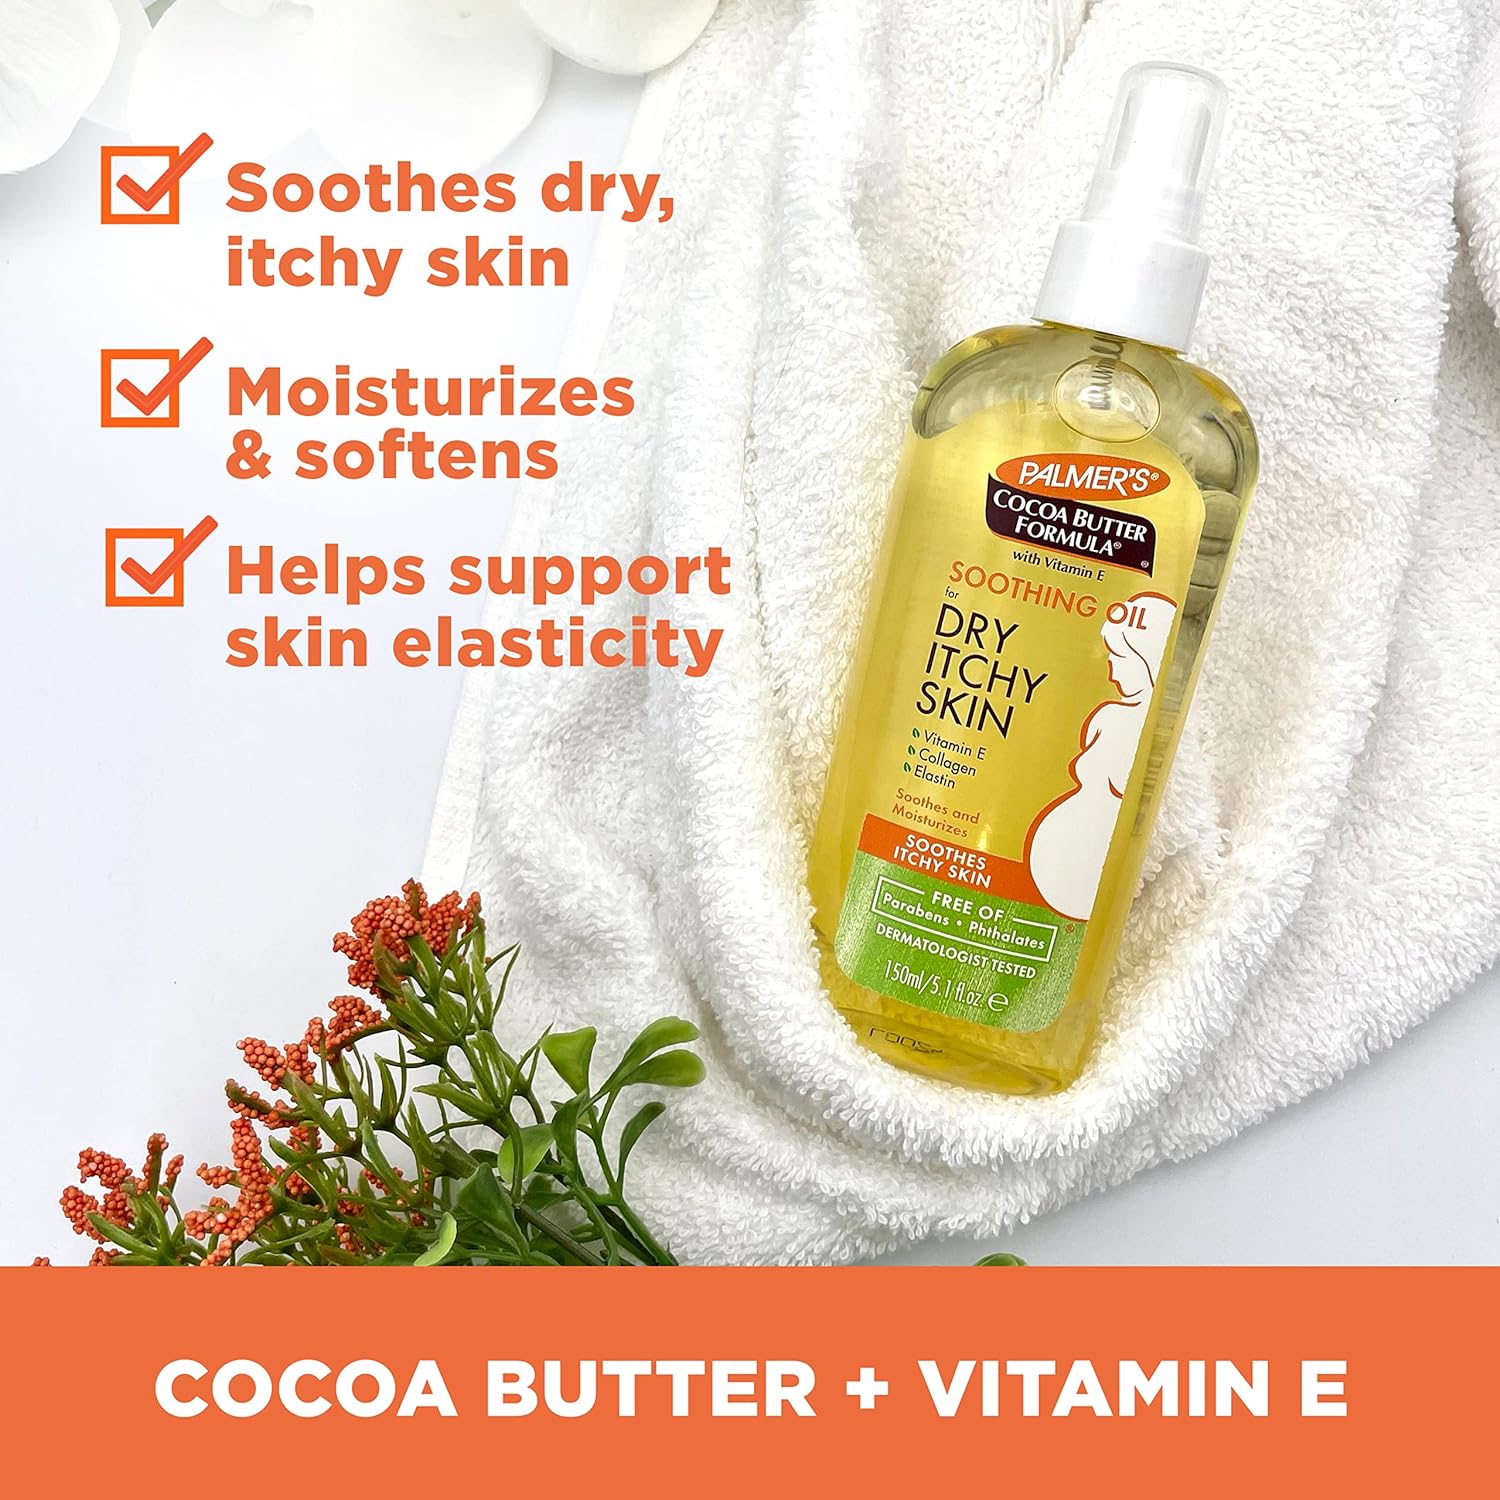 Palmer's Cocoa Butter Formula Soothing Oil with Vitamin E, Dry, Itchy Skin Relief, Pregnancy-Safe Anti-Itch Body Oil, 5.1 Ounces : Body Lotions : Beauty & Personal Care